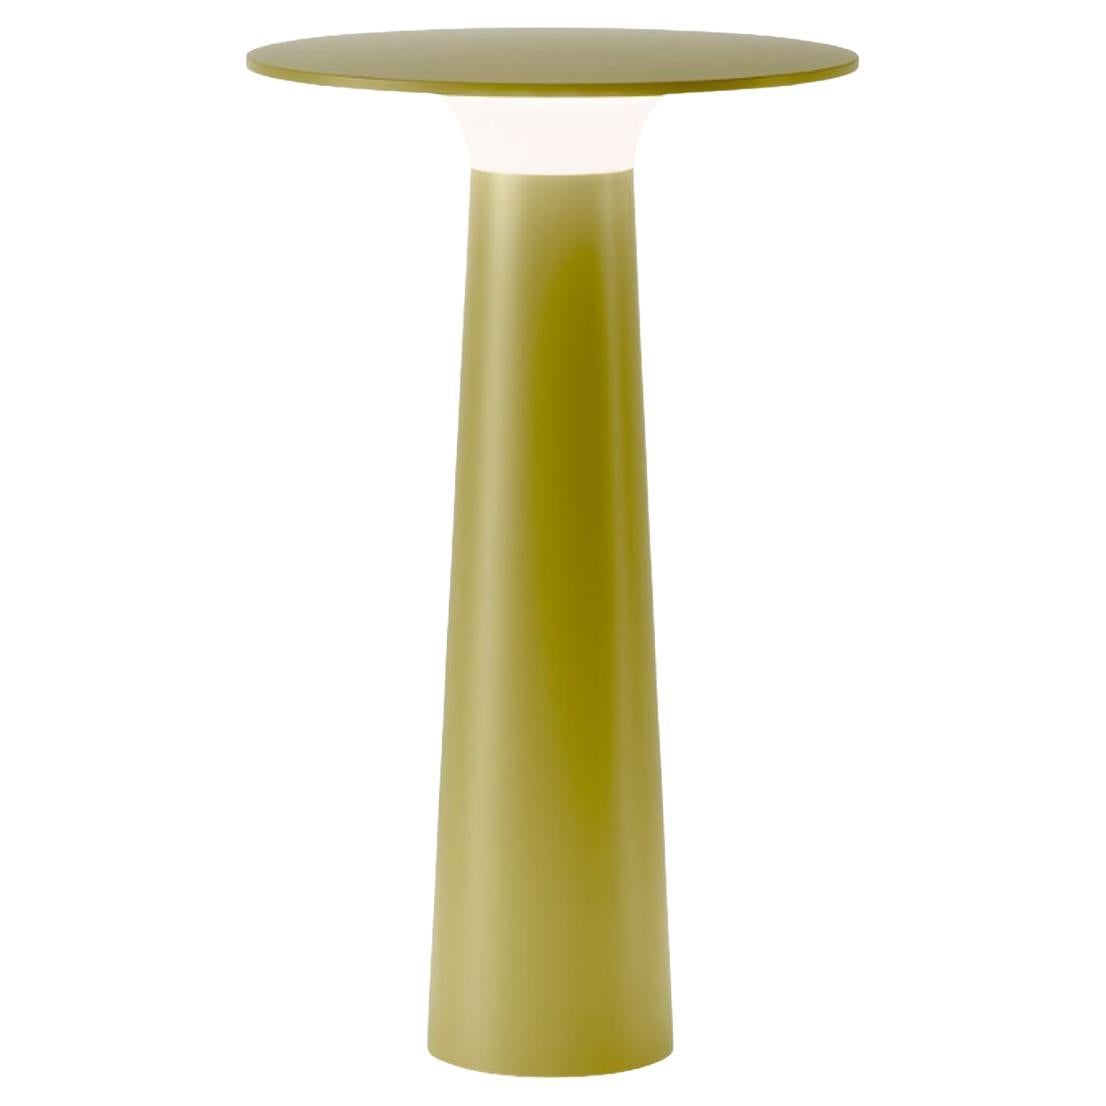 Klaus Nolting 'Lix' Portable Outdoor Aluminum Table Lamp in Yellow for IP44de For Sale